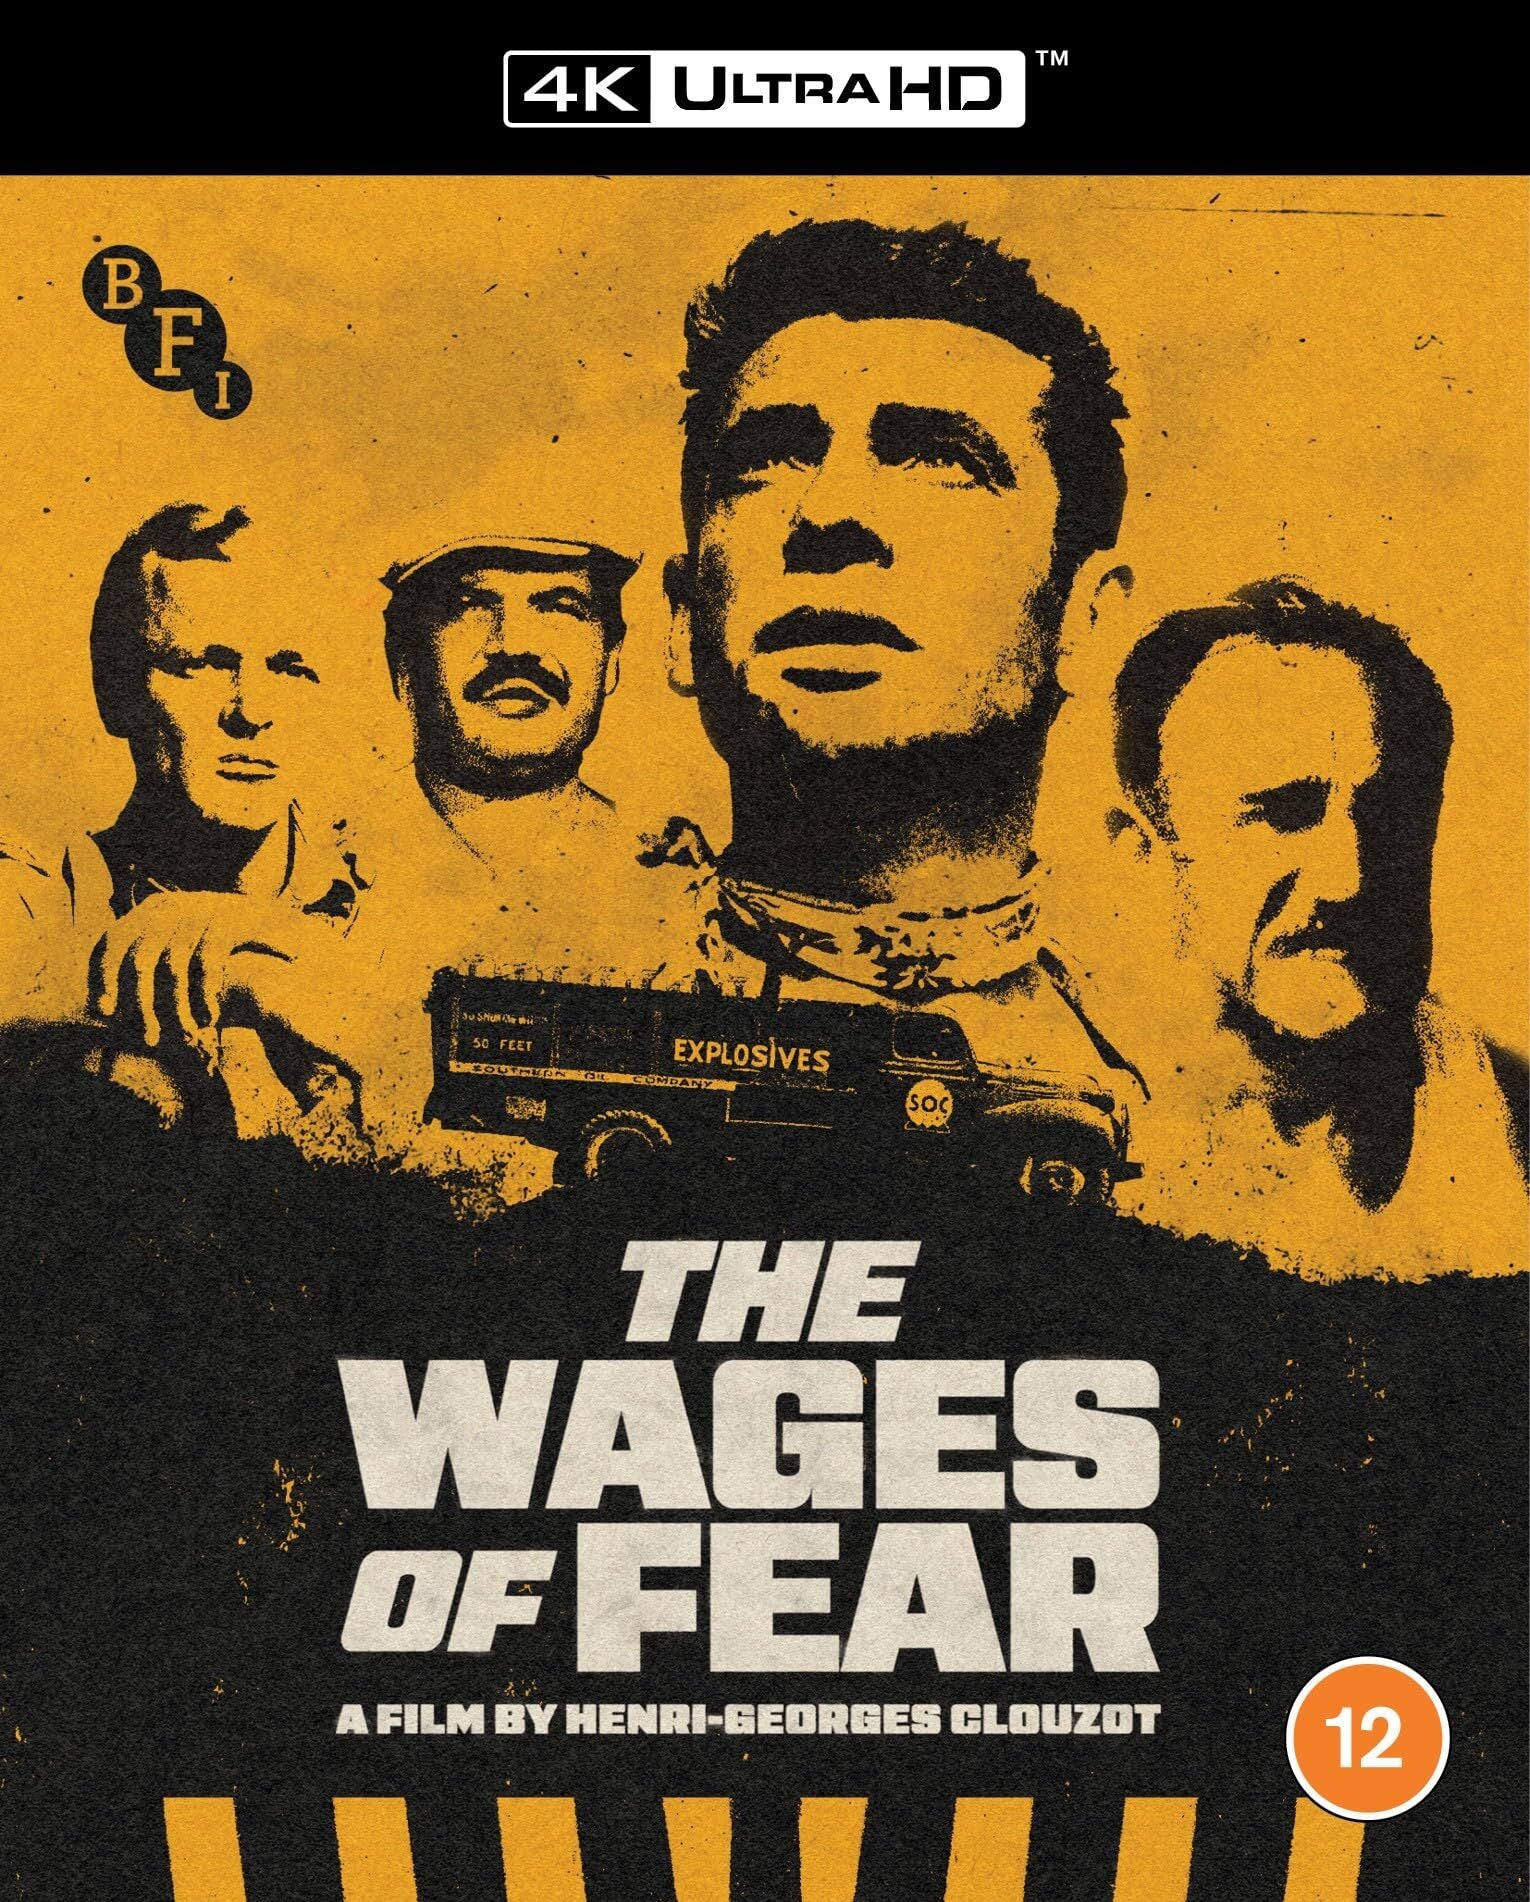 THE WAGES OF FEAR (REGION FREE IMPORT) 4K UHD